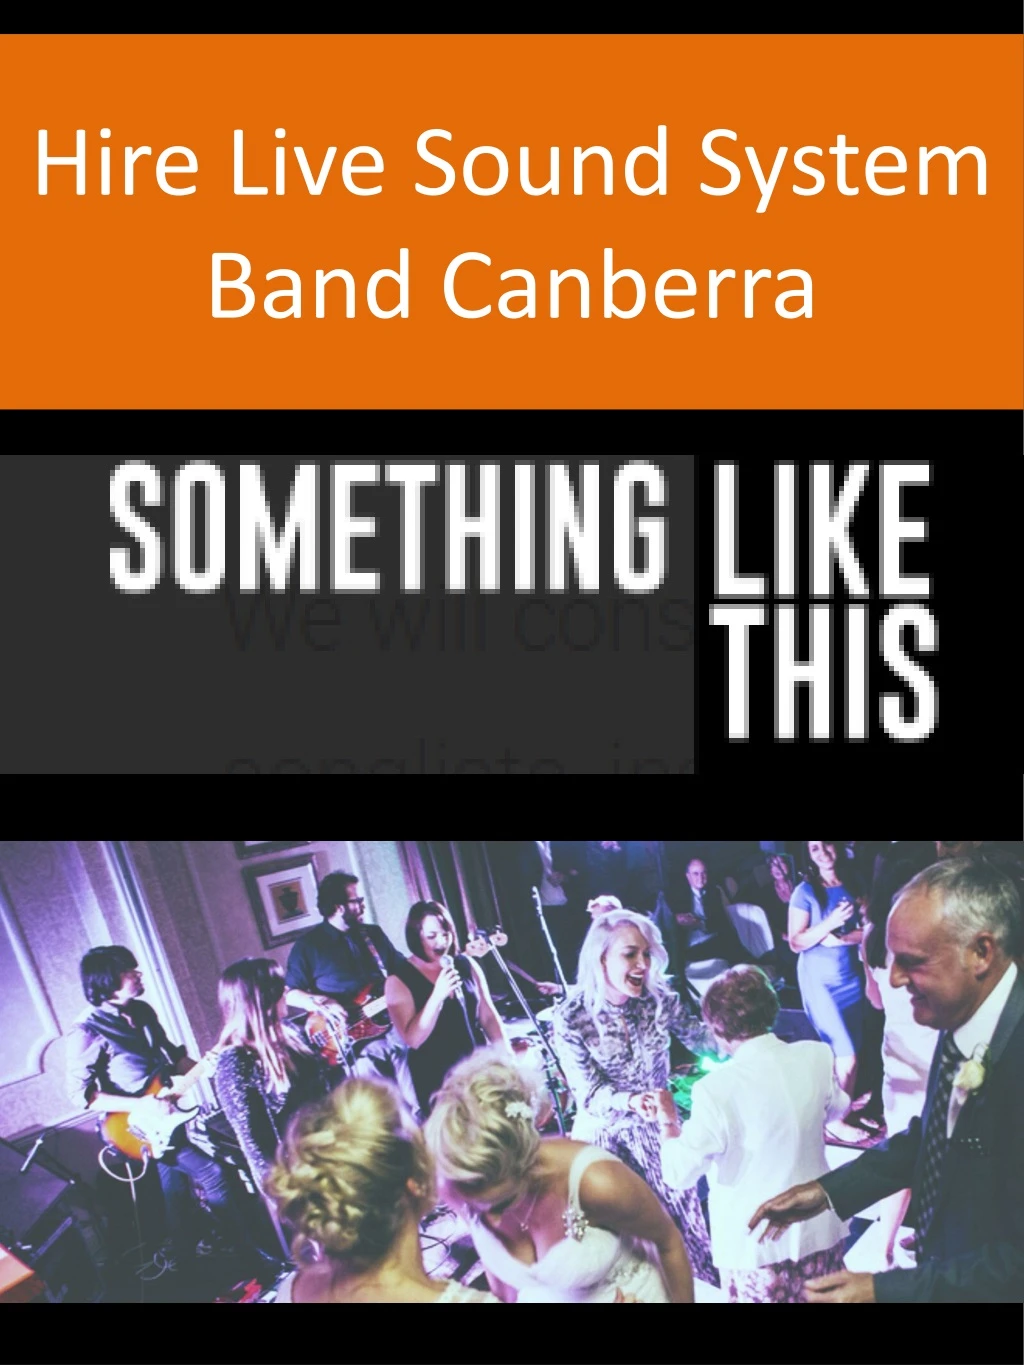 hire live sound system band canberra